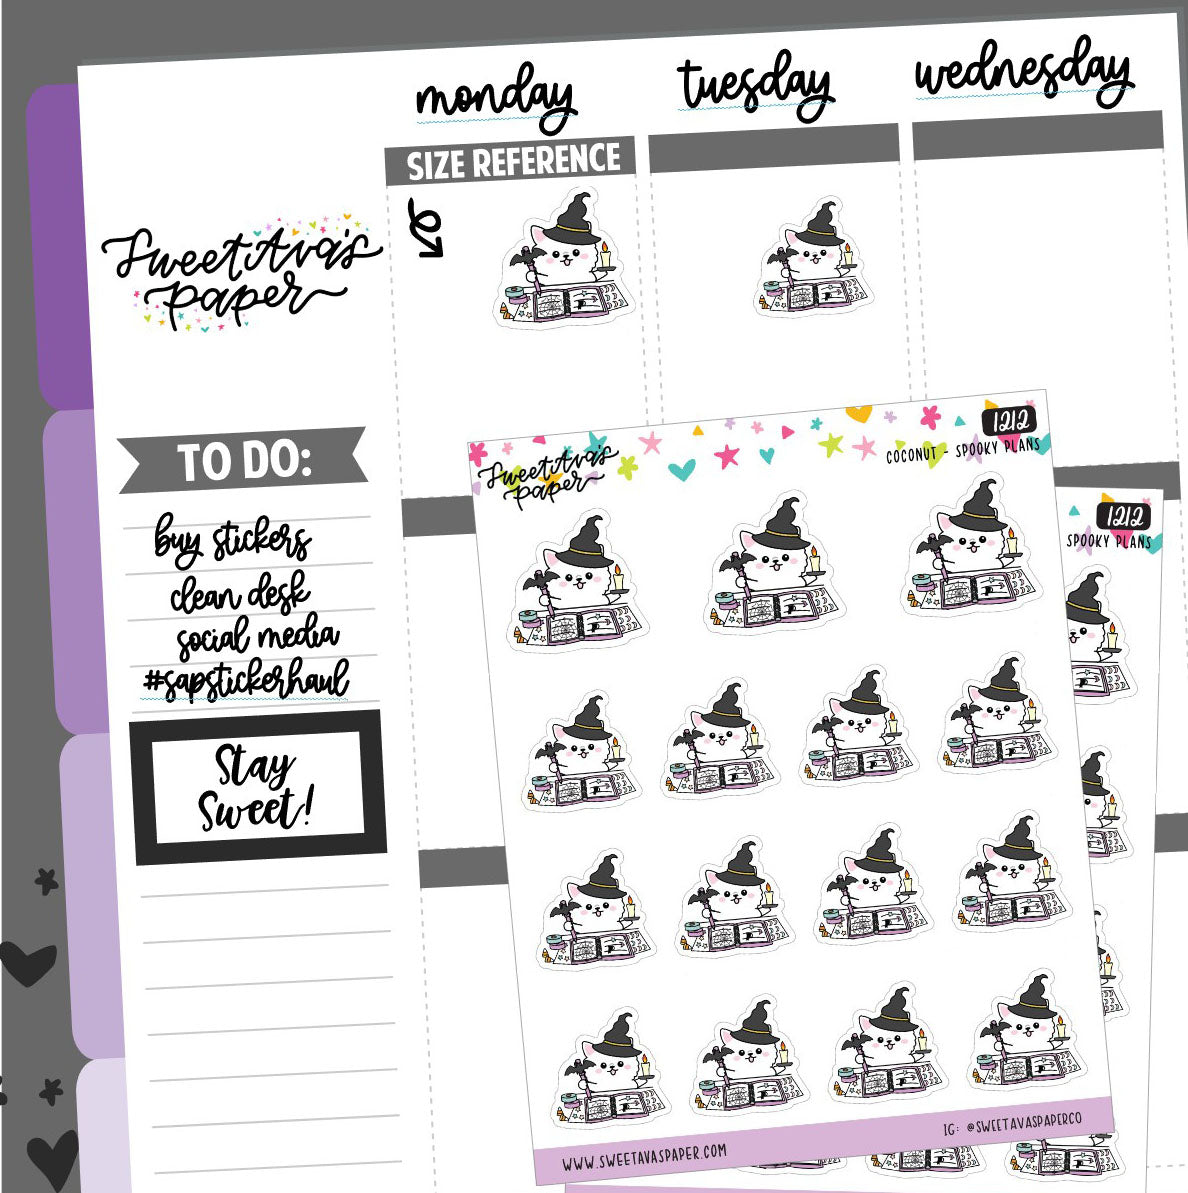 Halloween Planning Planner Stickers - Coconut the Puppy [1212]